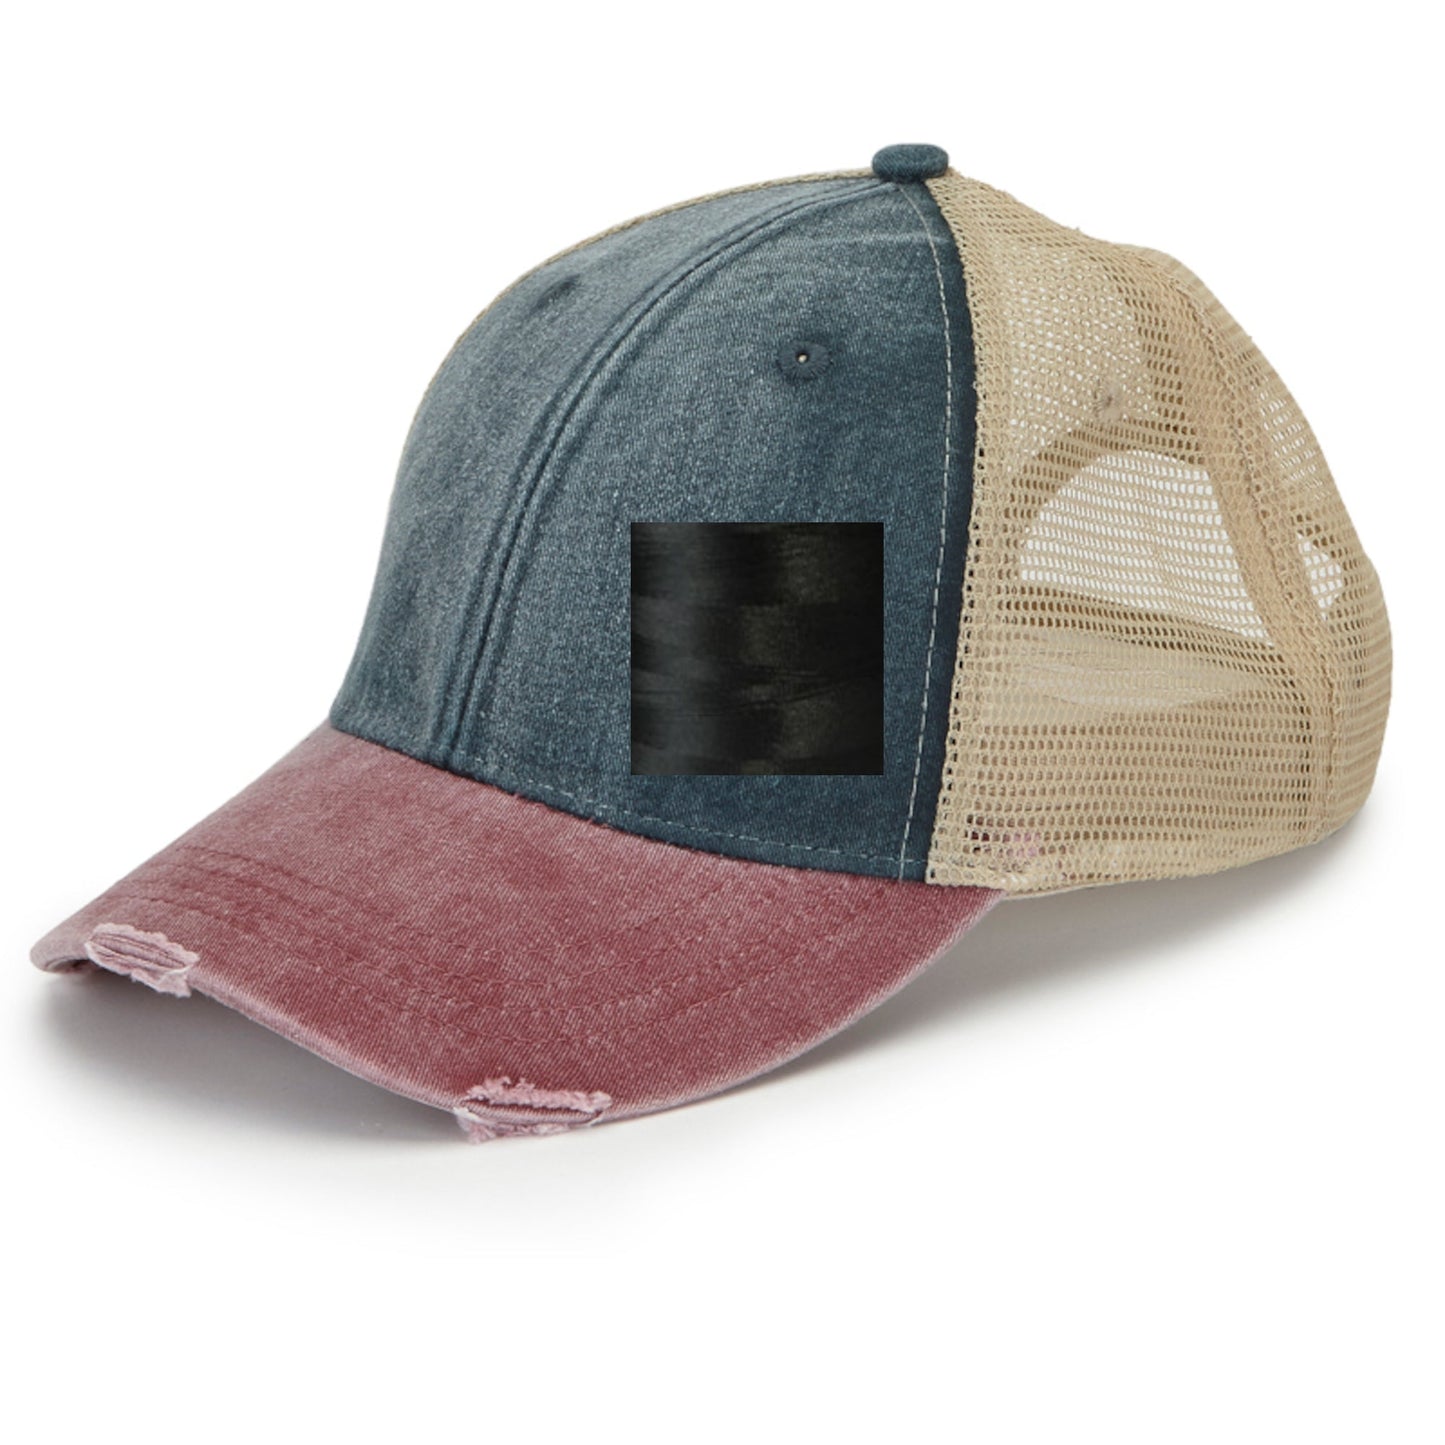 Maine Hat | Distressed Snapback Trucker | state cap | many color choices